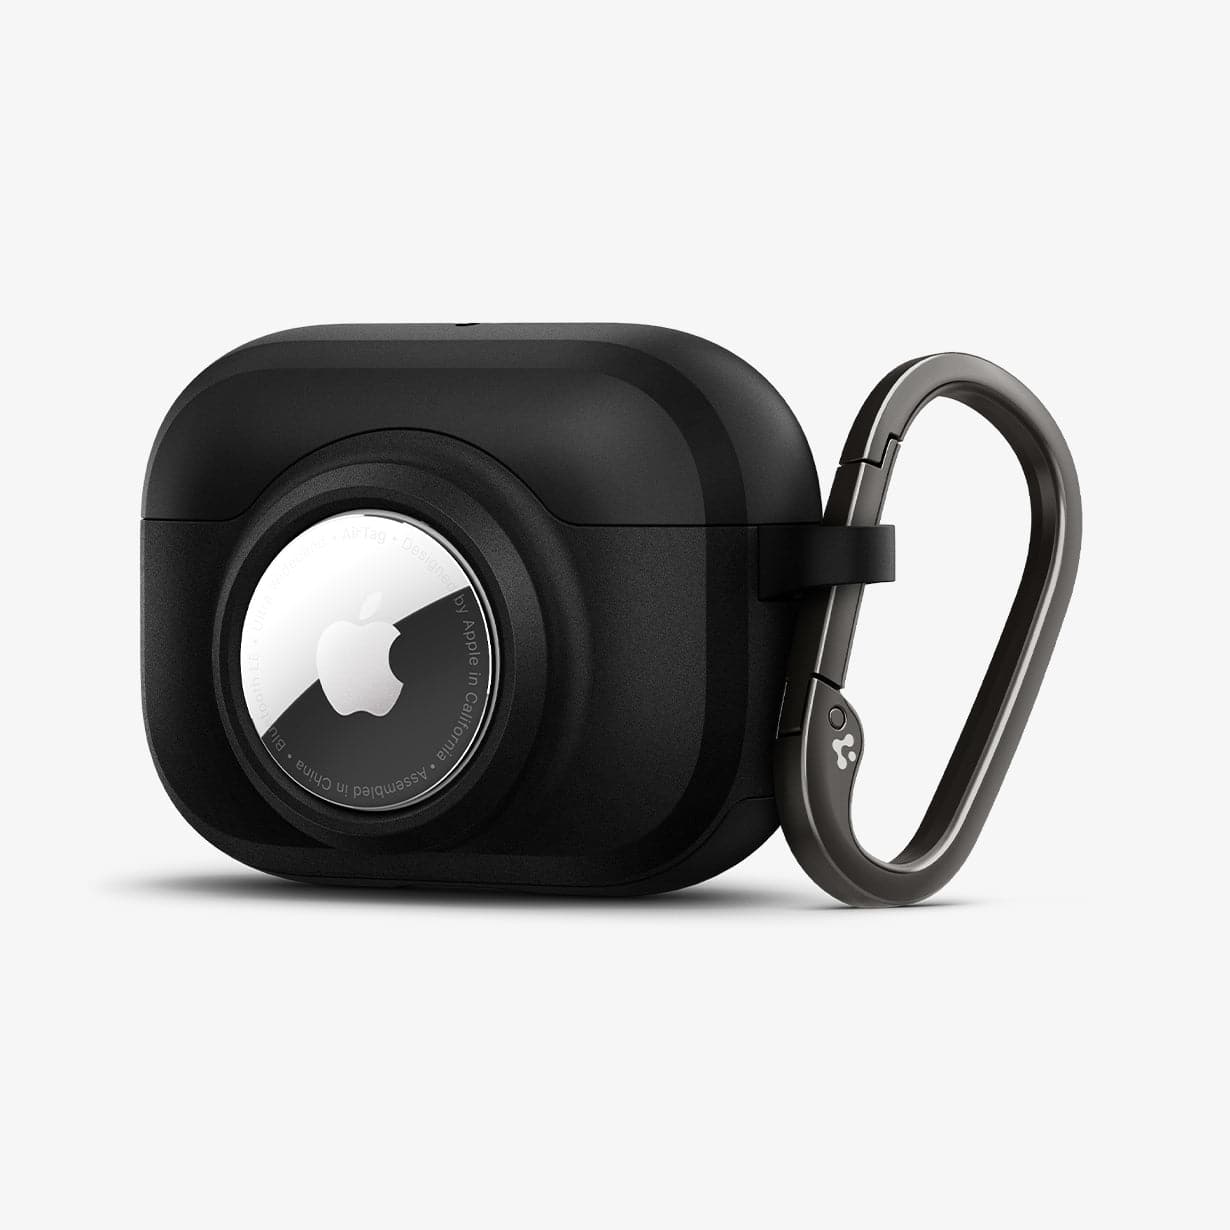 ACS03167 - Apple AirPods Pro Case Tag Armor Duo in black showing the front, side, AirTag in slot and carabiner